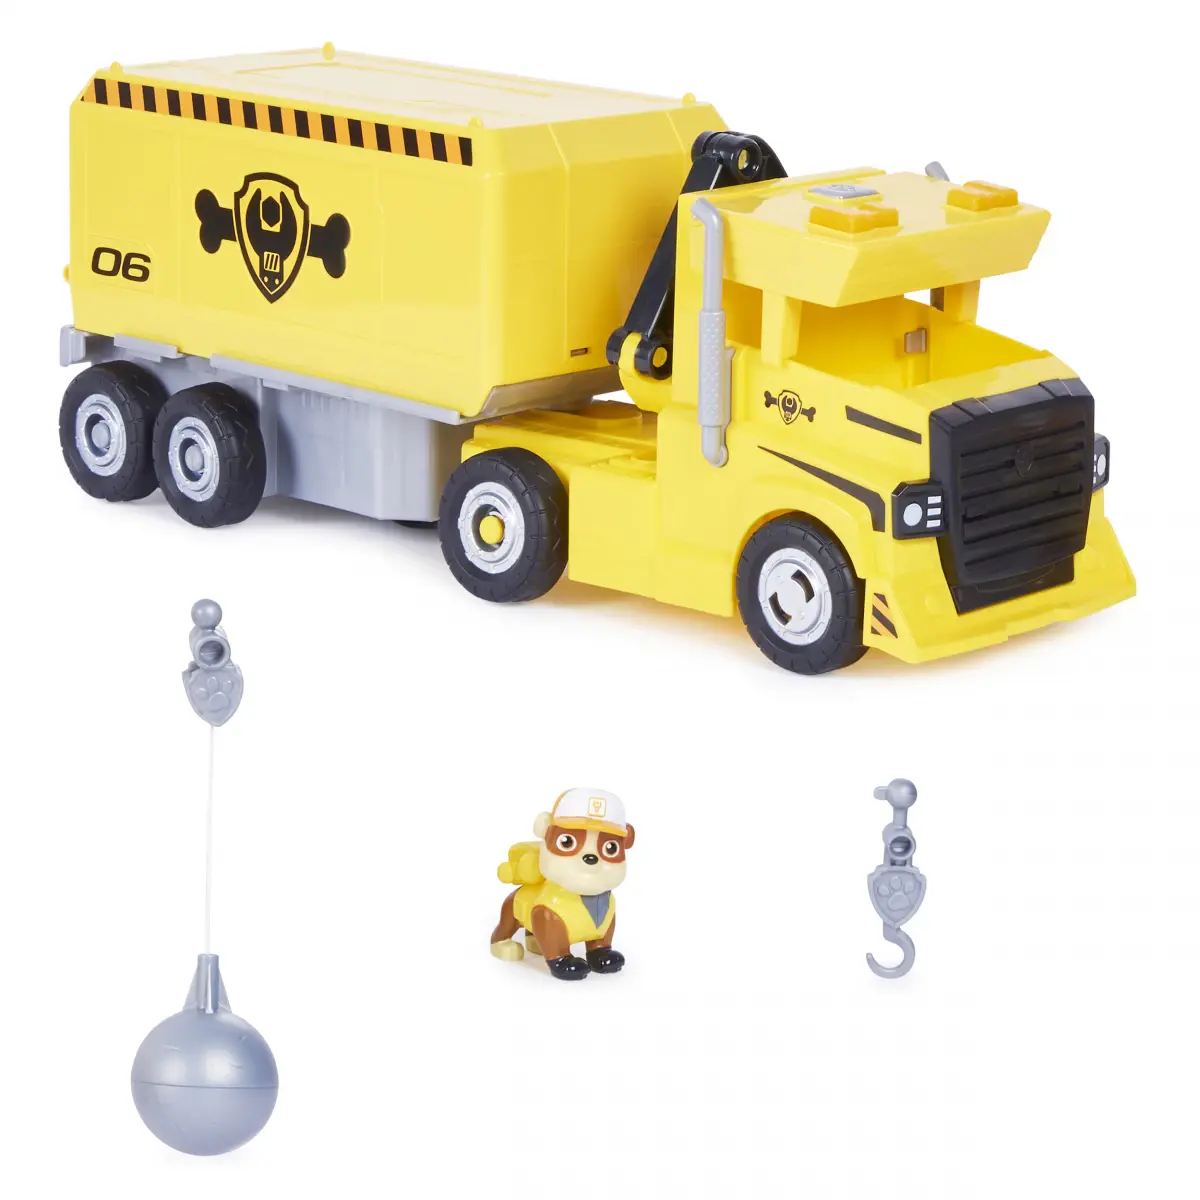 Paw Patrol, Rubble 2 In 1 Transforming X-Treme Truck With Excavator Toy, Crane Toy, Lights And Sounds, Action Figures, Kids Toys For Ages 3 And Up